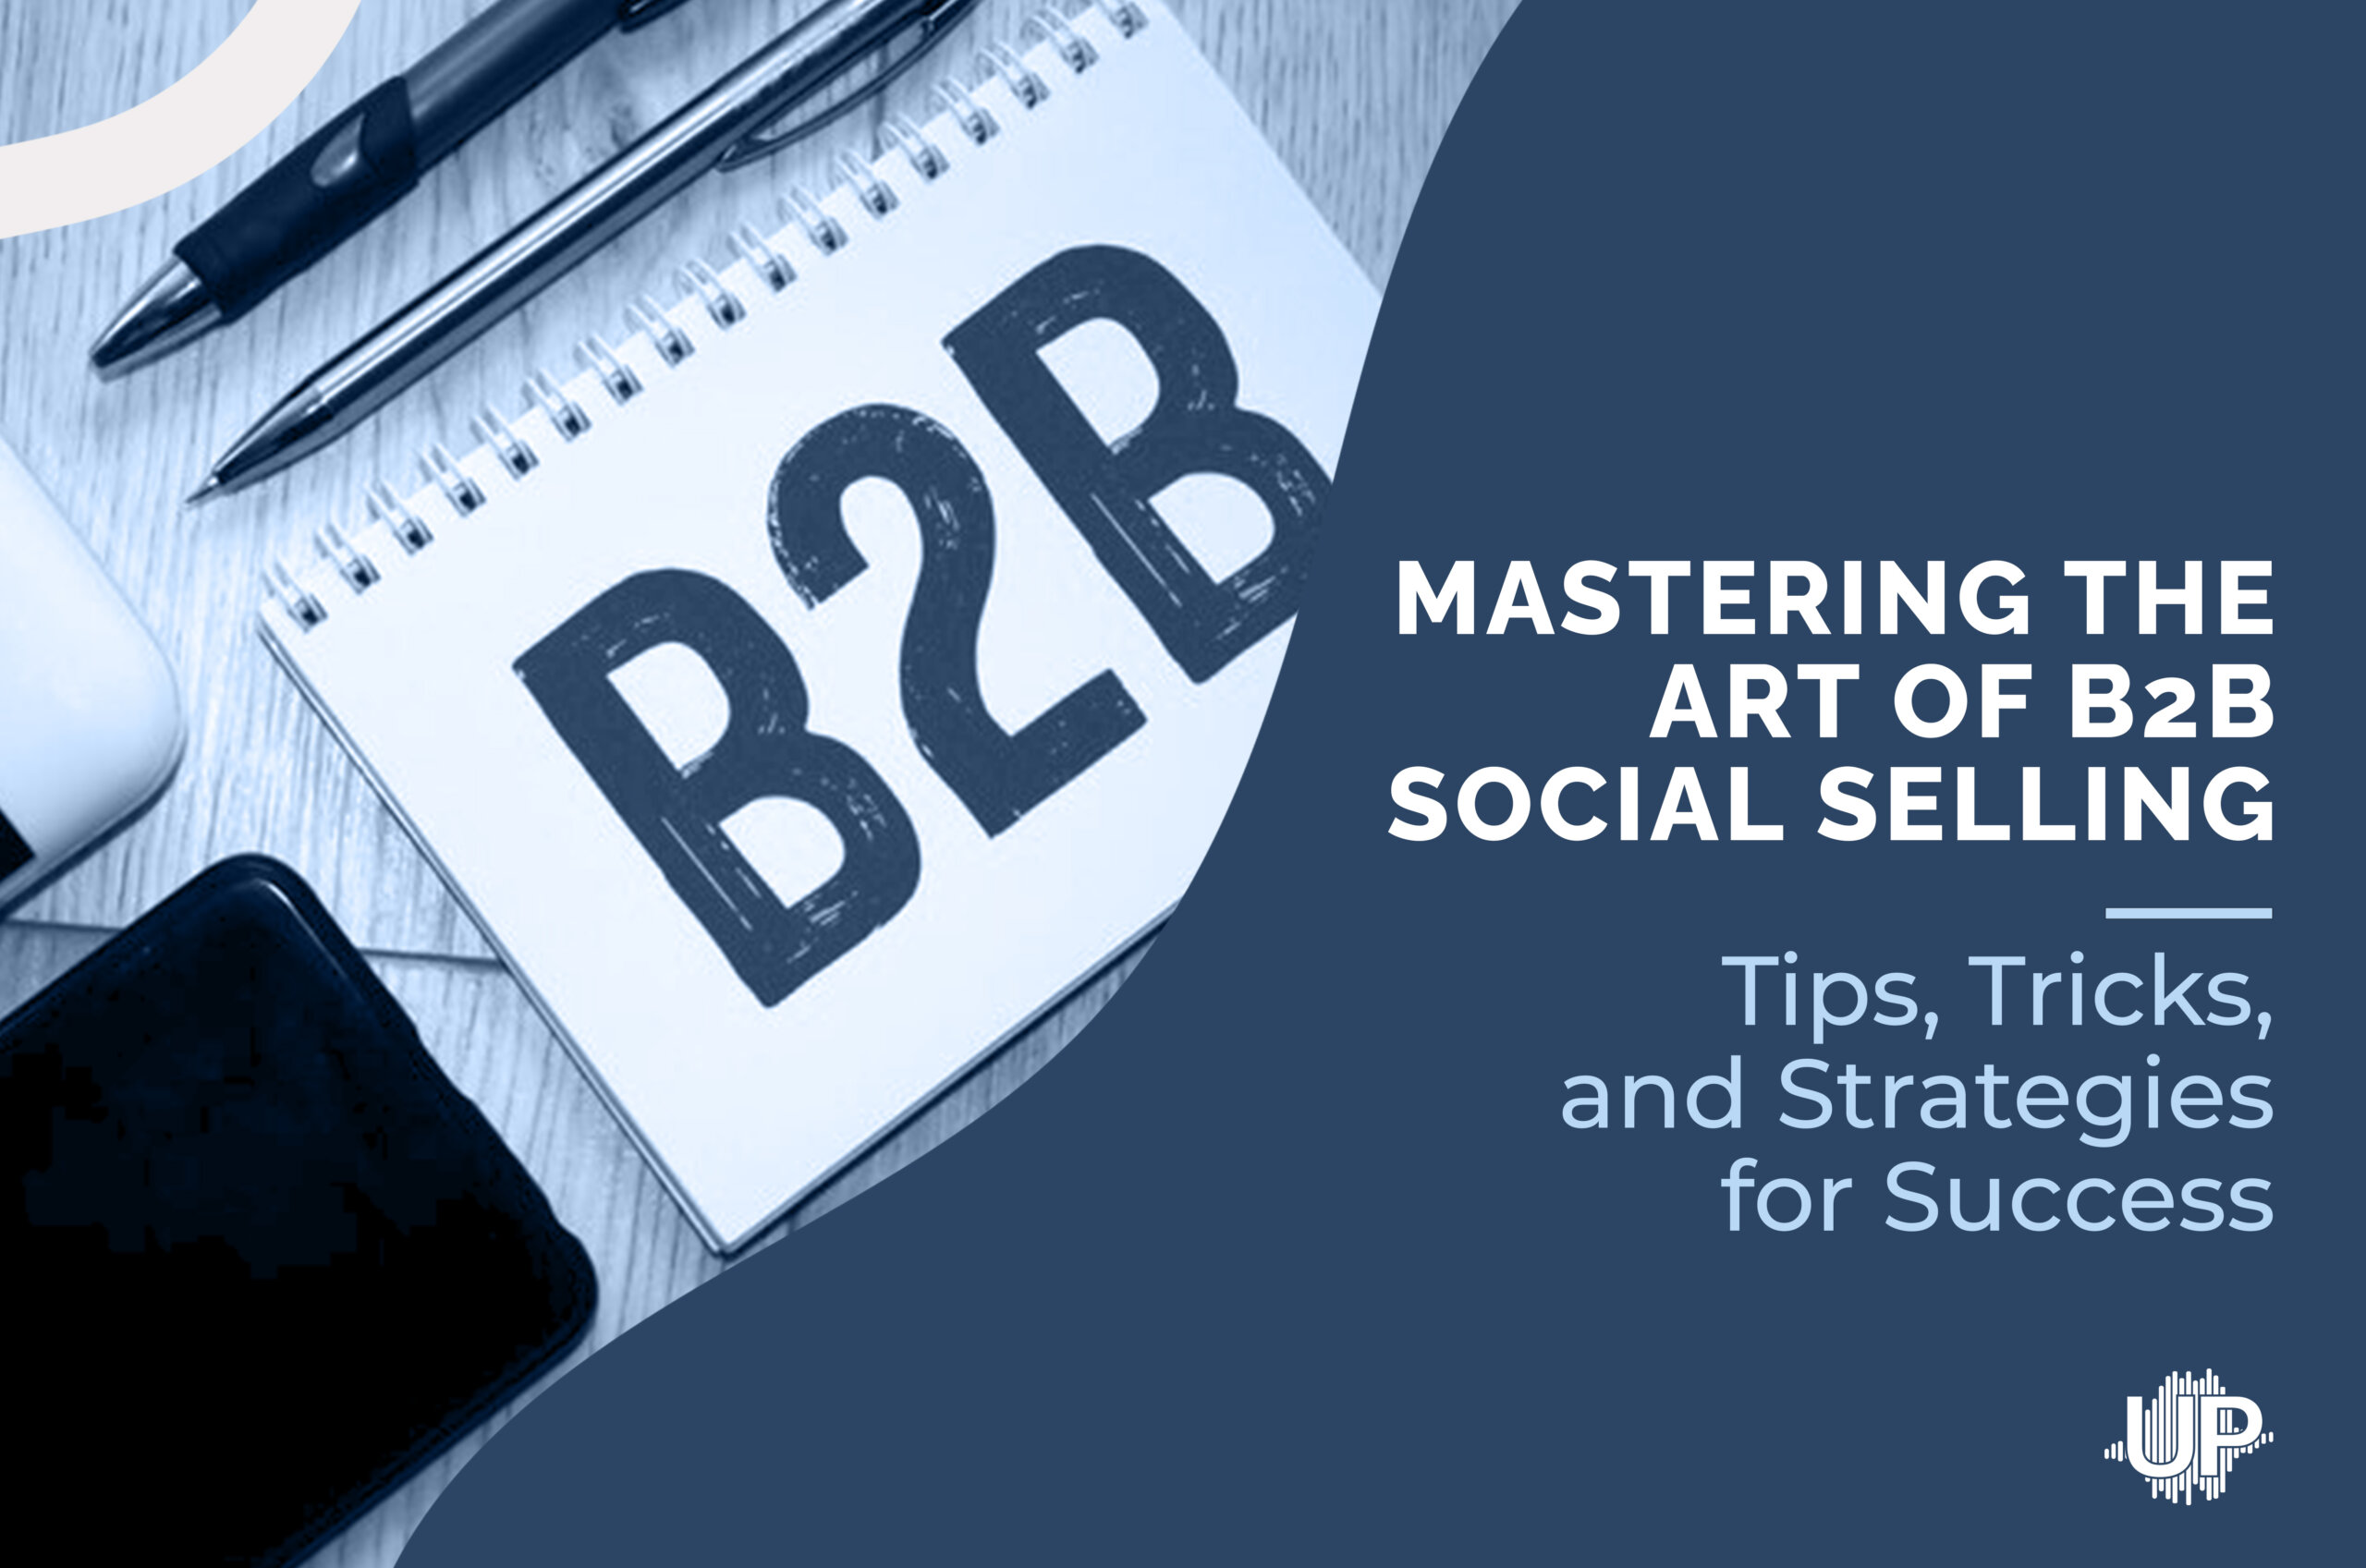 Featured image for “Mastering the Art of B2B Social Selling: Tips, Tricks, and Strategies for Success”